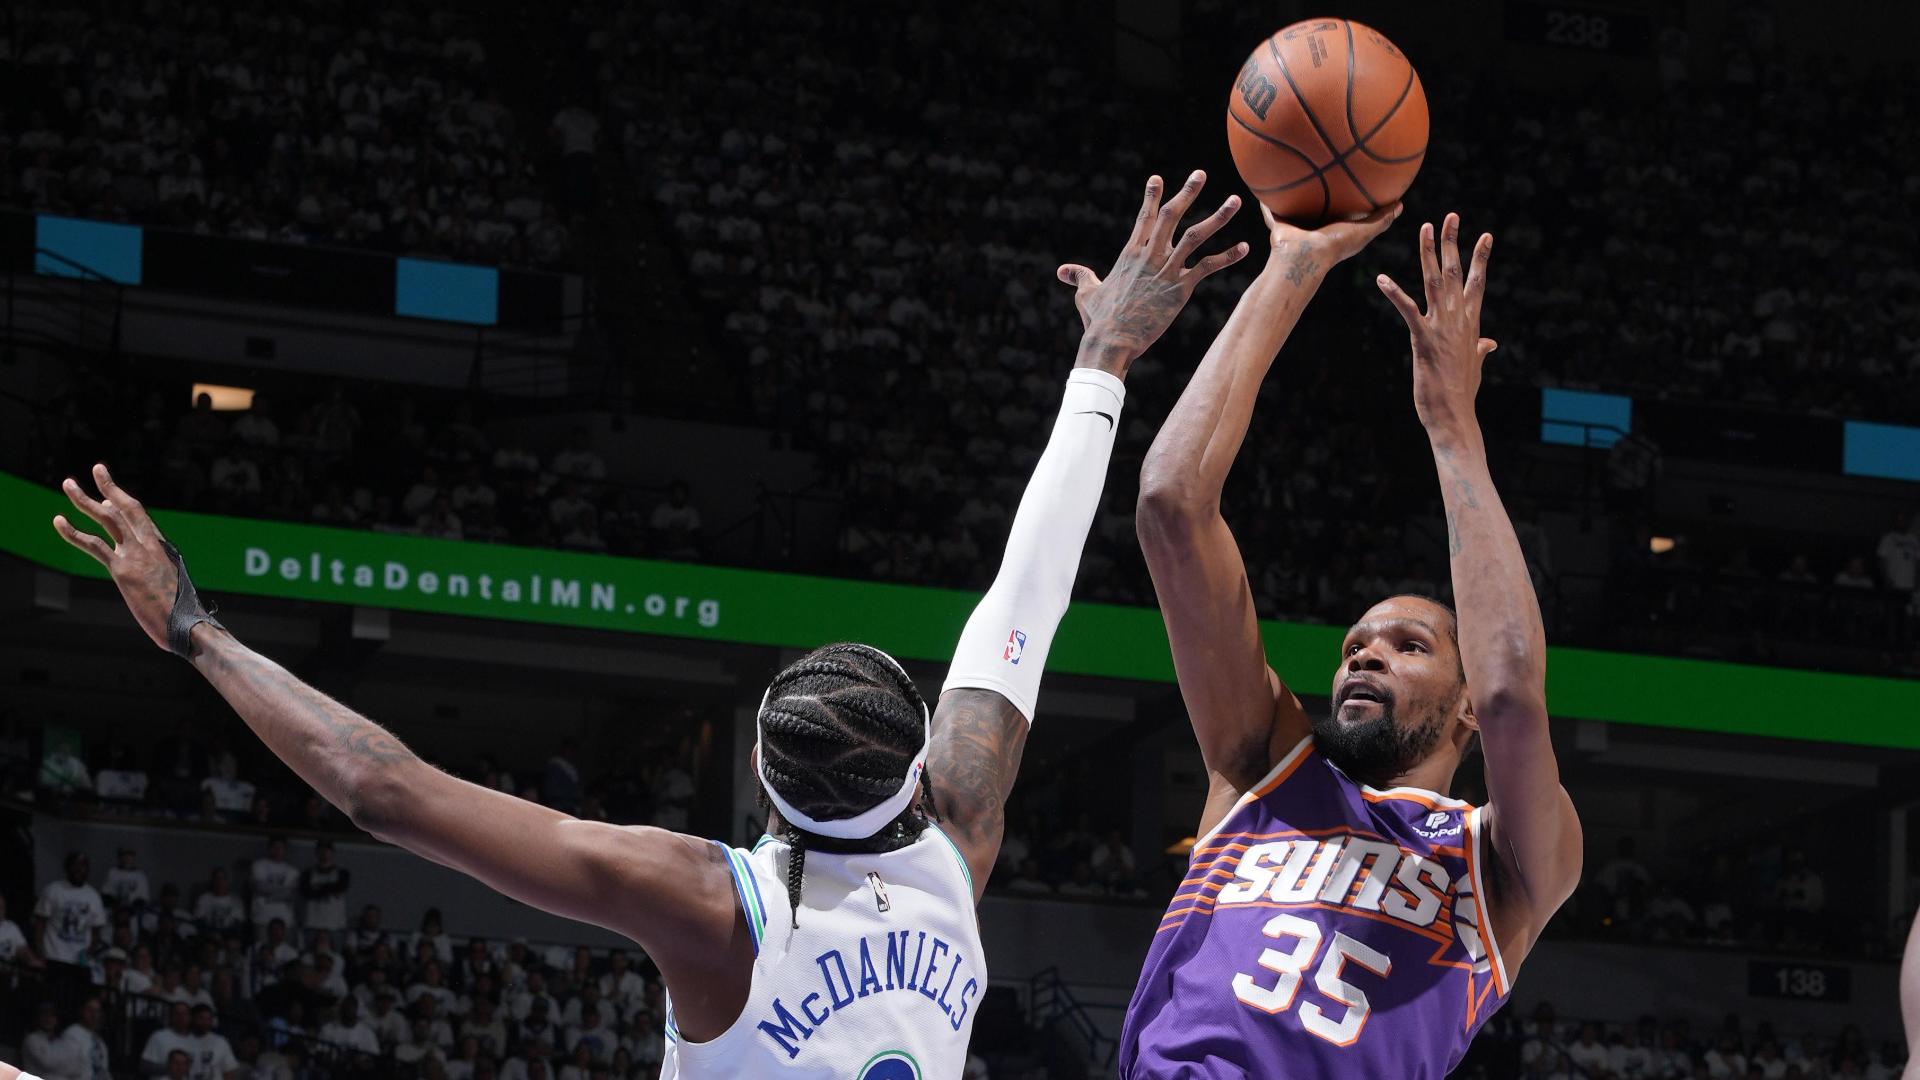 Kevin Durant fades away for the tough Phoenix basket in the second quarter.